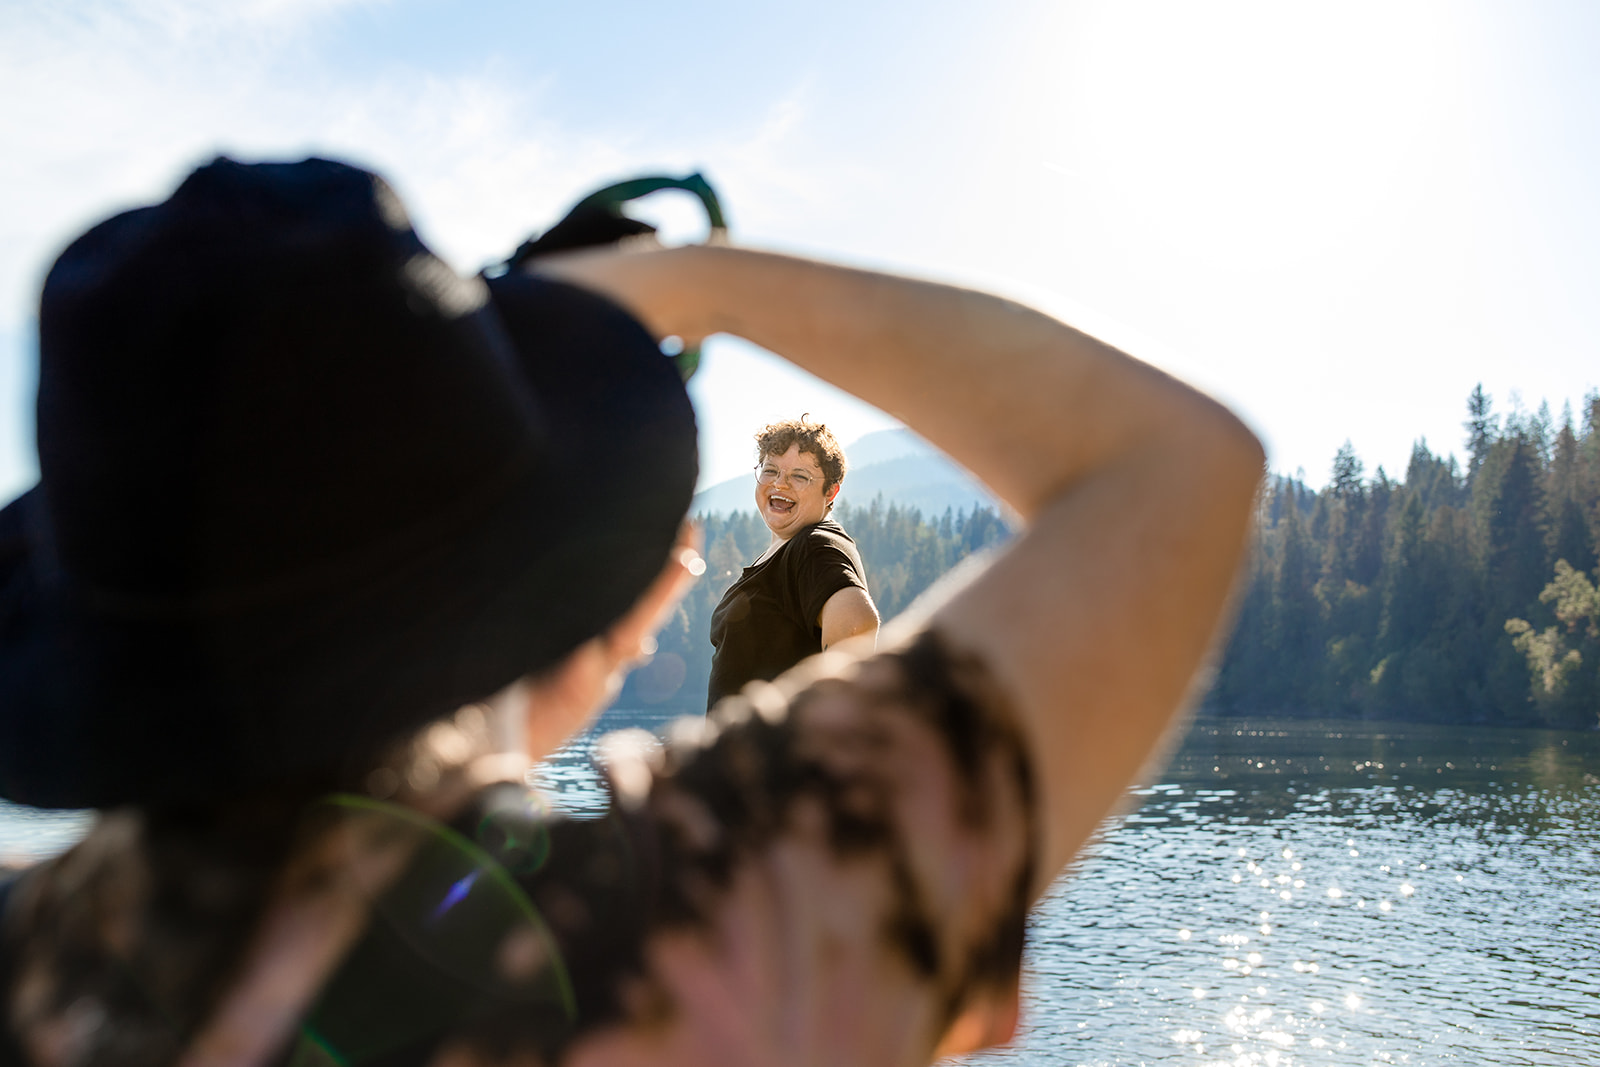 Erika Broom, a photographer with The Babes Club, takes a photograph of a client during an outdoor empowerment photography session in the kootenays in british columbia